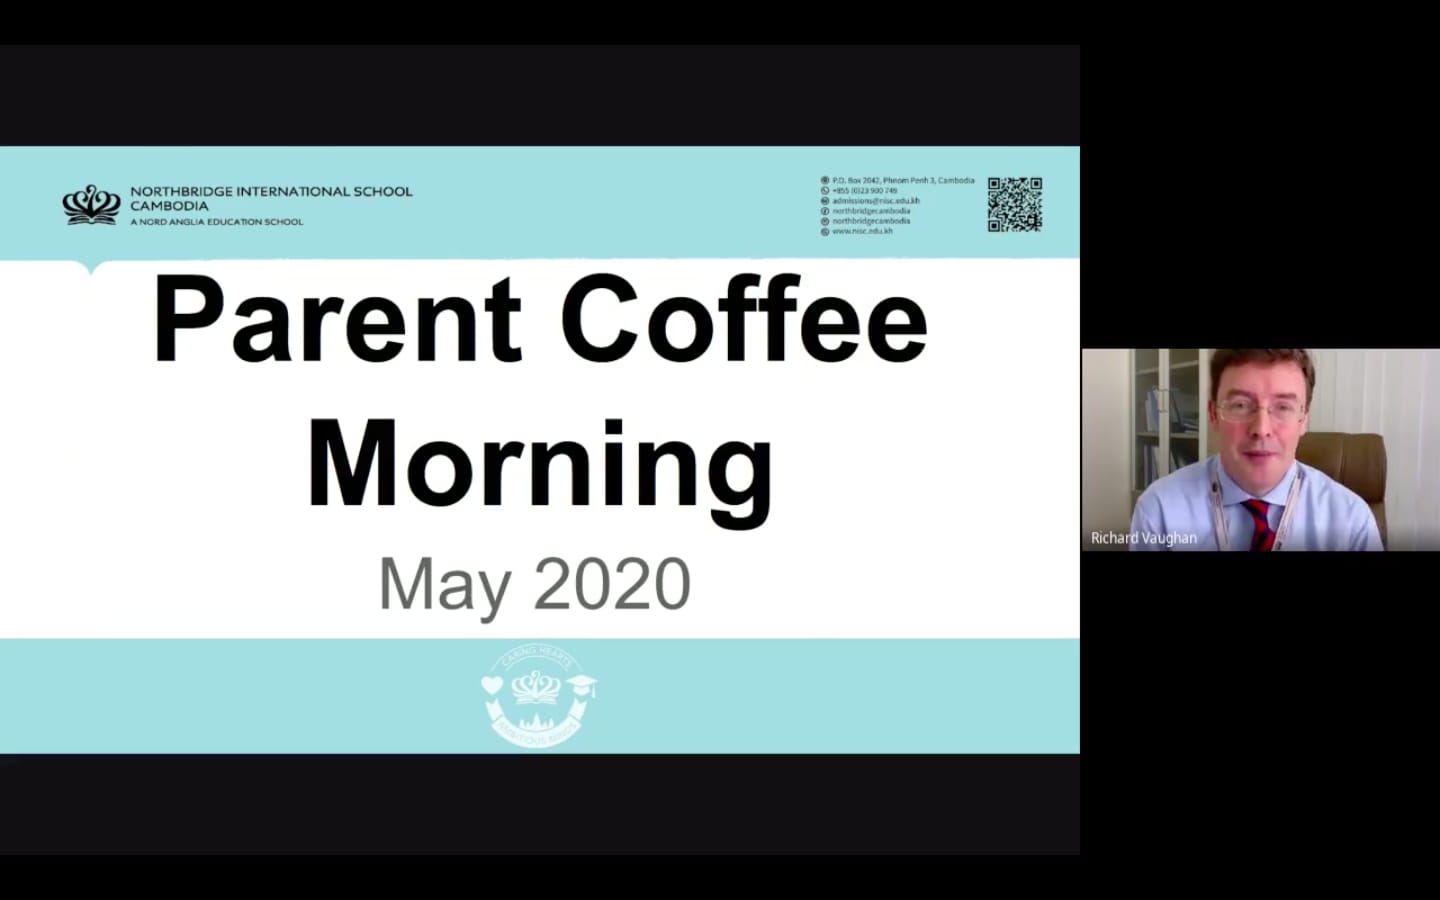 Introducing the monthly Virtual Northbridge Coffee Morning for Friday 8 May 2020 - introducing-the-monthly-virtual-northbridge-coffee-morning-for-friday-8-may-2020